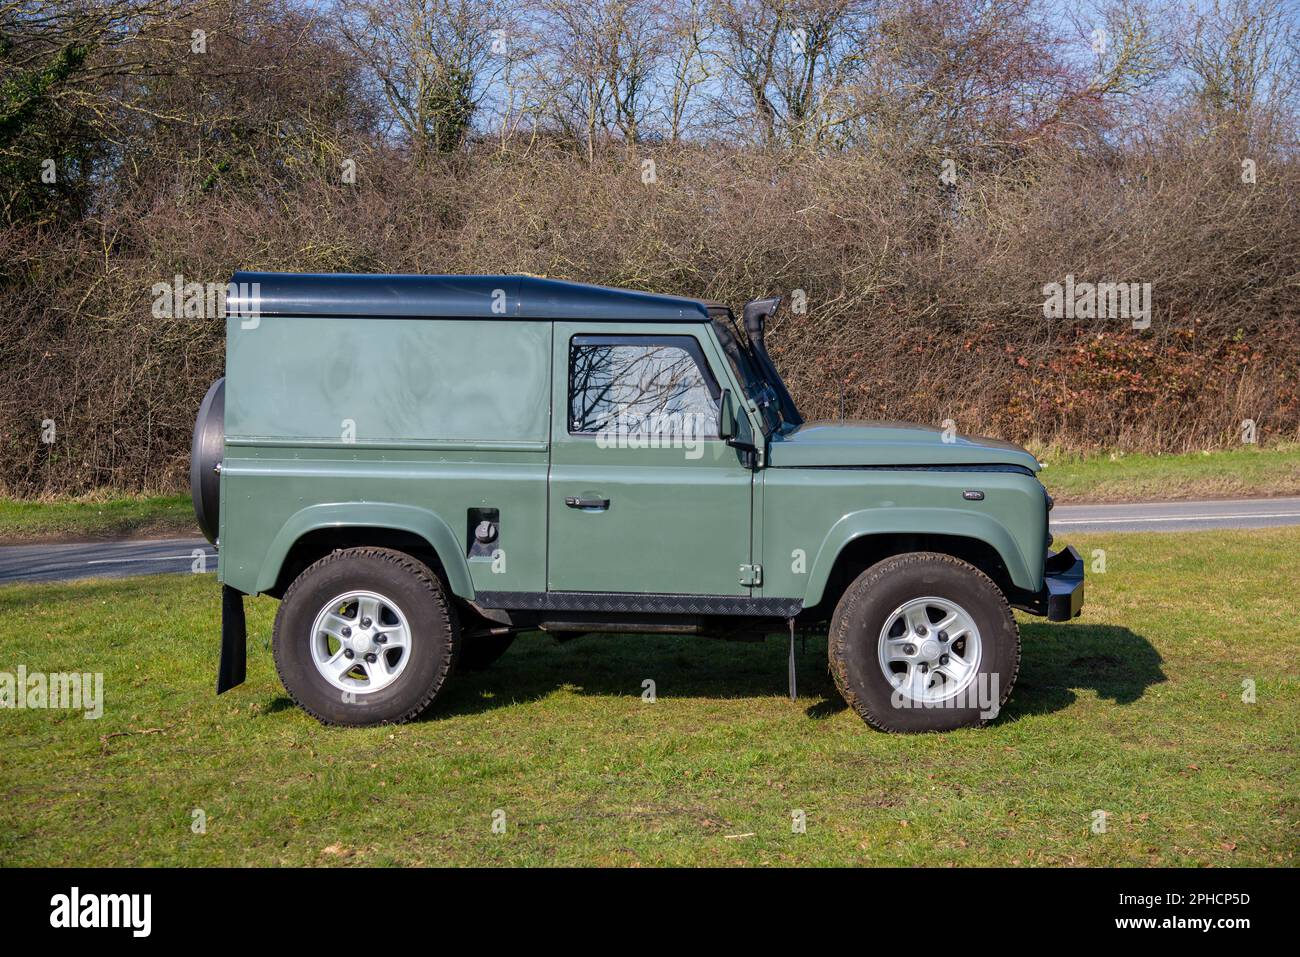 Green Land Rover Defender equipped with five-spoke alloy wheels and snorkel, parked on grass with a country lane and trees behind Stock Photo